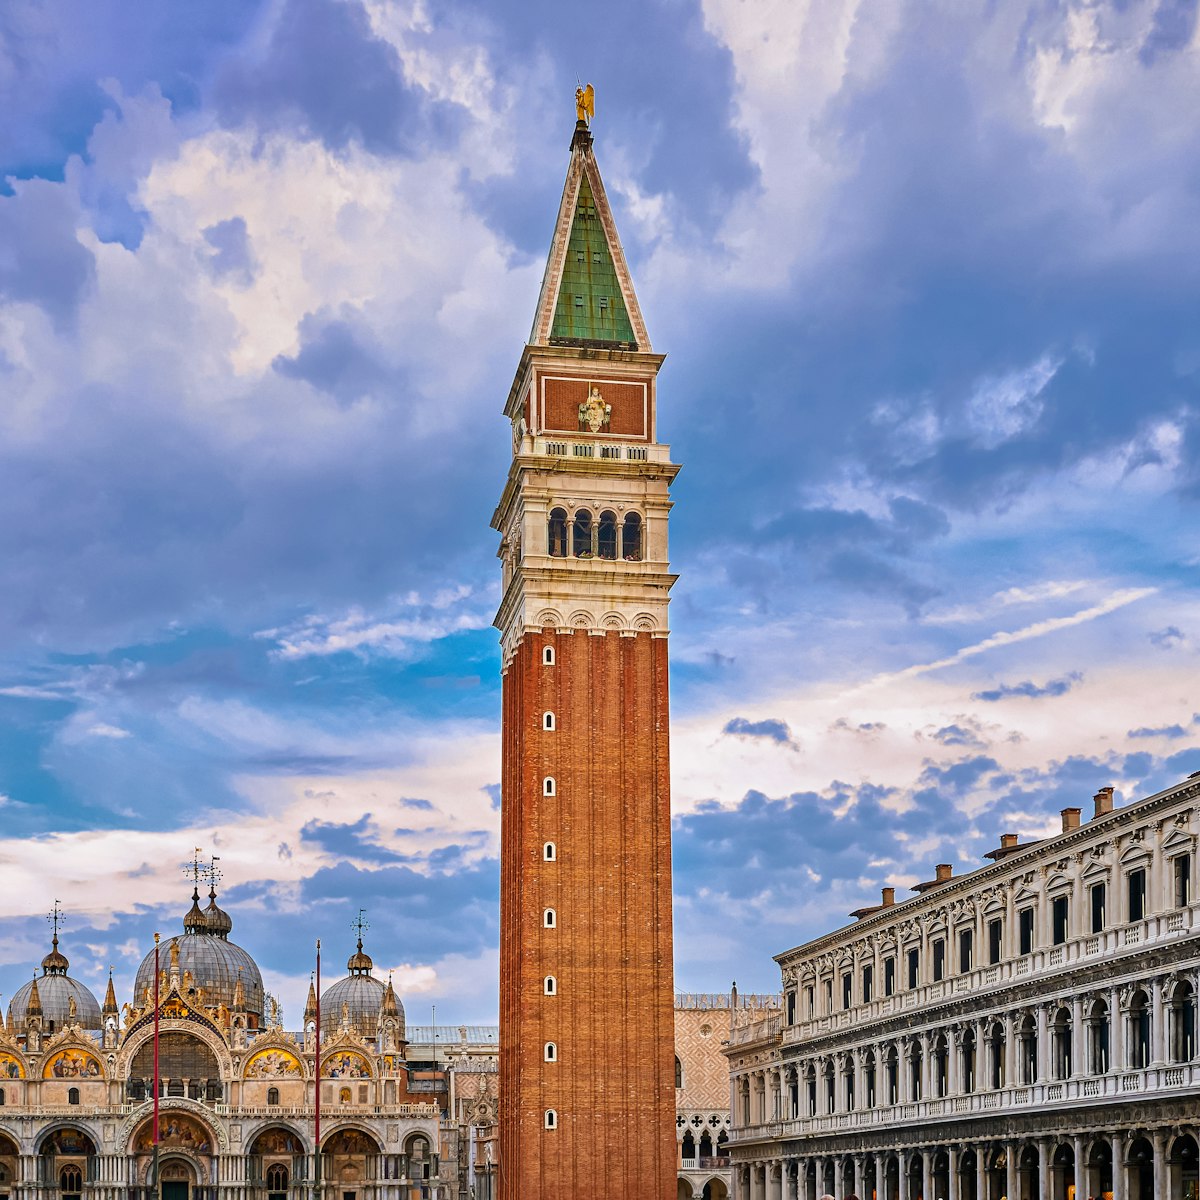 View of St Mark's square or piazza di San Marco, Venice, Italy, sundown on cloudy day. Bell tower or Campanile, St Mark's Basilica main facade and entrance and Procurate Vecchie building, beautiful sky and clouds, UNESCO World heritage city.
1584875726
View of St Mark's square or piazza di San Marco, Venice, Italy in sundown on cloudy day. Campanile, St Mark's Basilica, Procurate Vecchie building